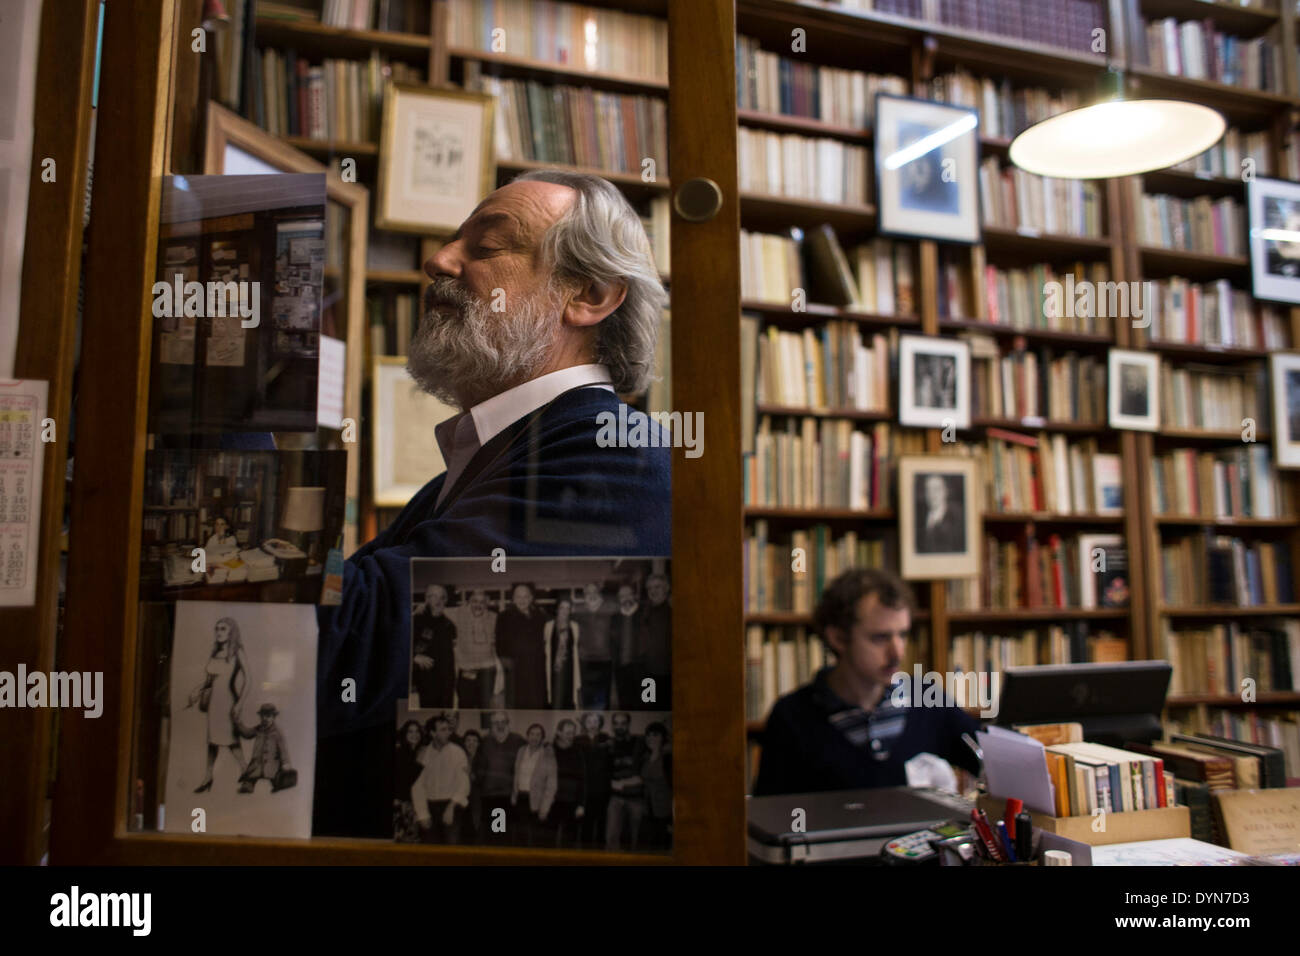 Buenos Aires, Argentina. 22nd Apr, 2014. Alberto Casares, a book seller, watches a shelf in his library specialized in old books, in the city of Buenos Aires, capital of Argentina, on April 22, 2014. The World Book Day is commemorated on Wednesday, aiming to promote reading, and boost the editorial industry and the protection of the intellectual property by copyrights. © Martin Zabala/Xinhua/Alamy Live News Stock Photo